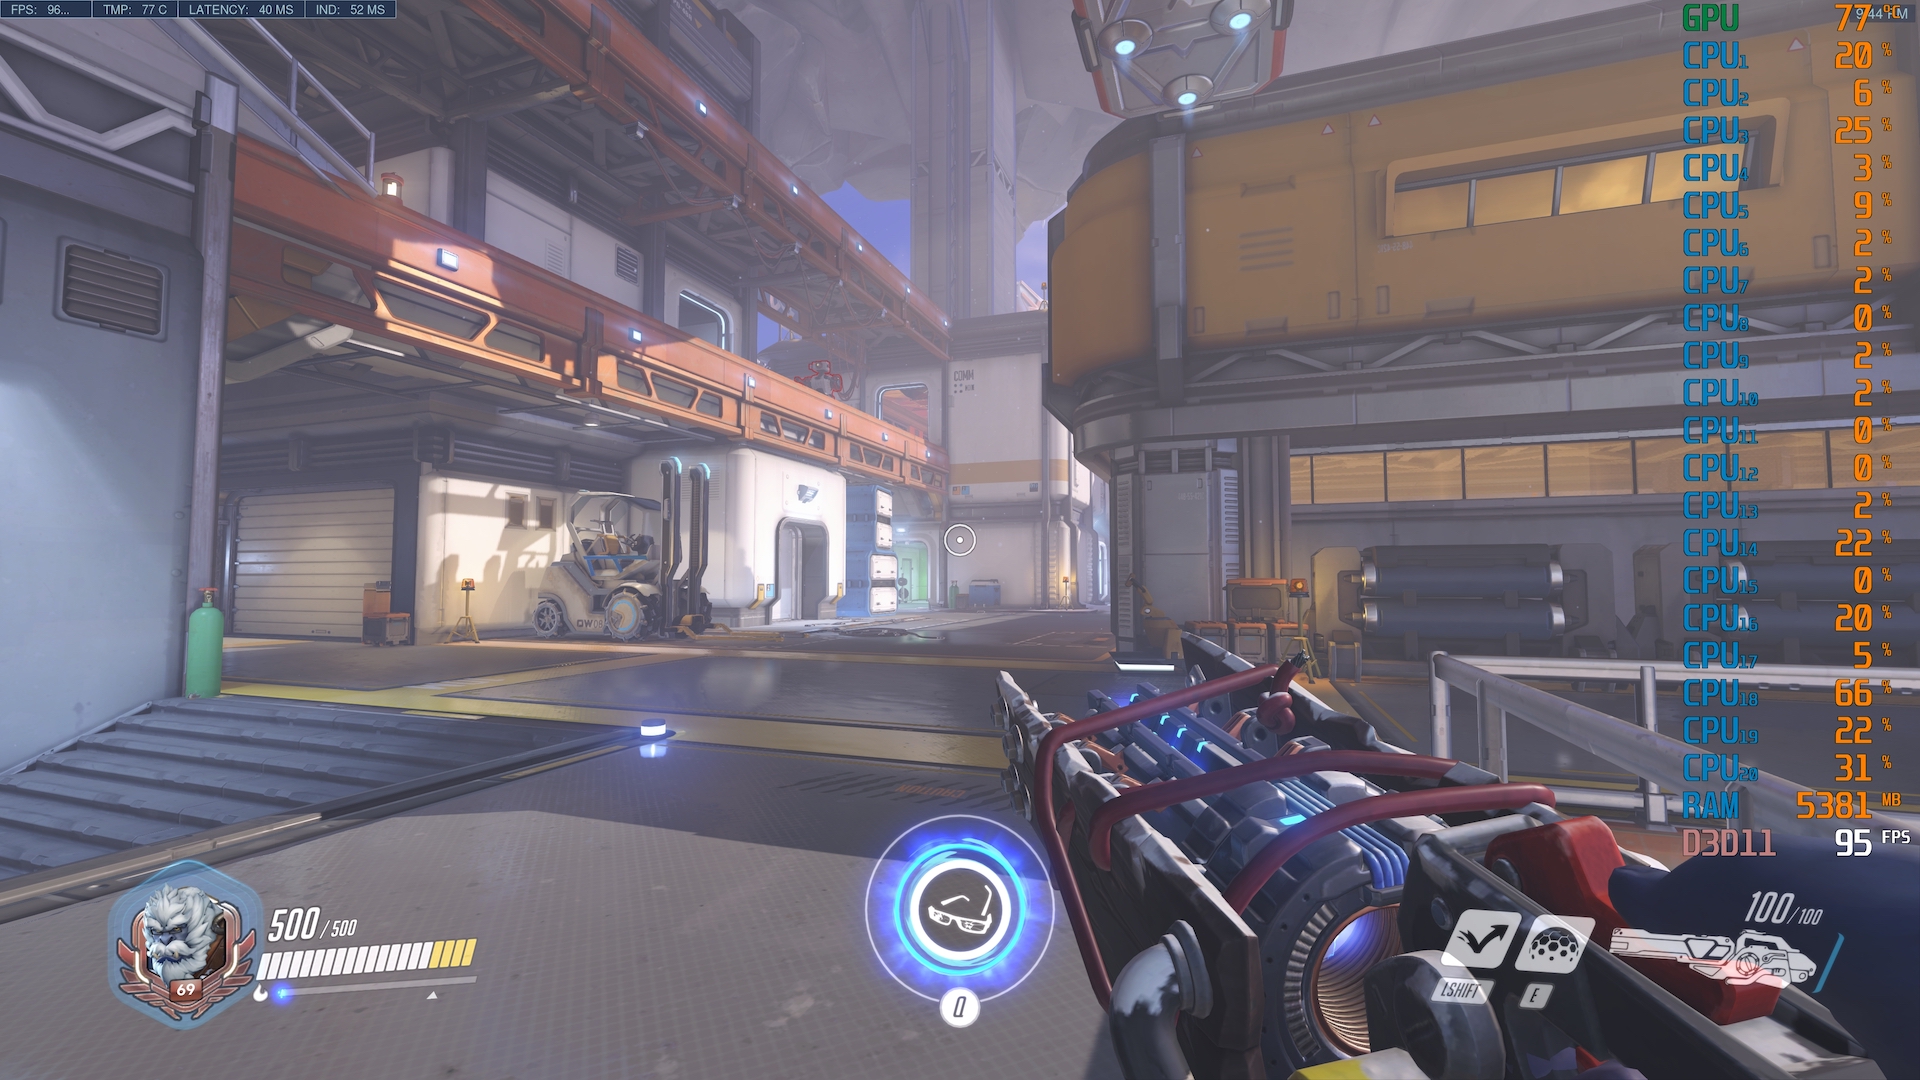 Overwatch at 3840x2160 on maxed Epic settings